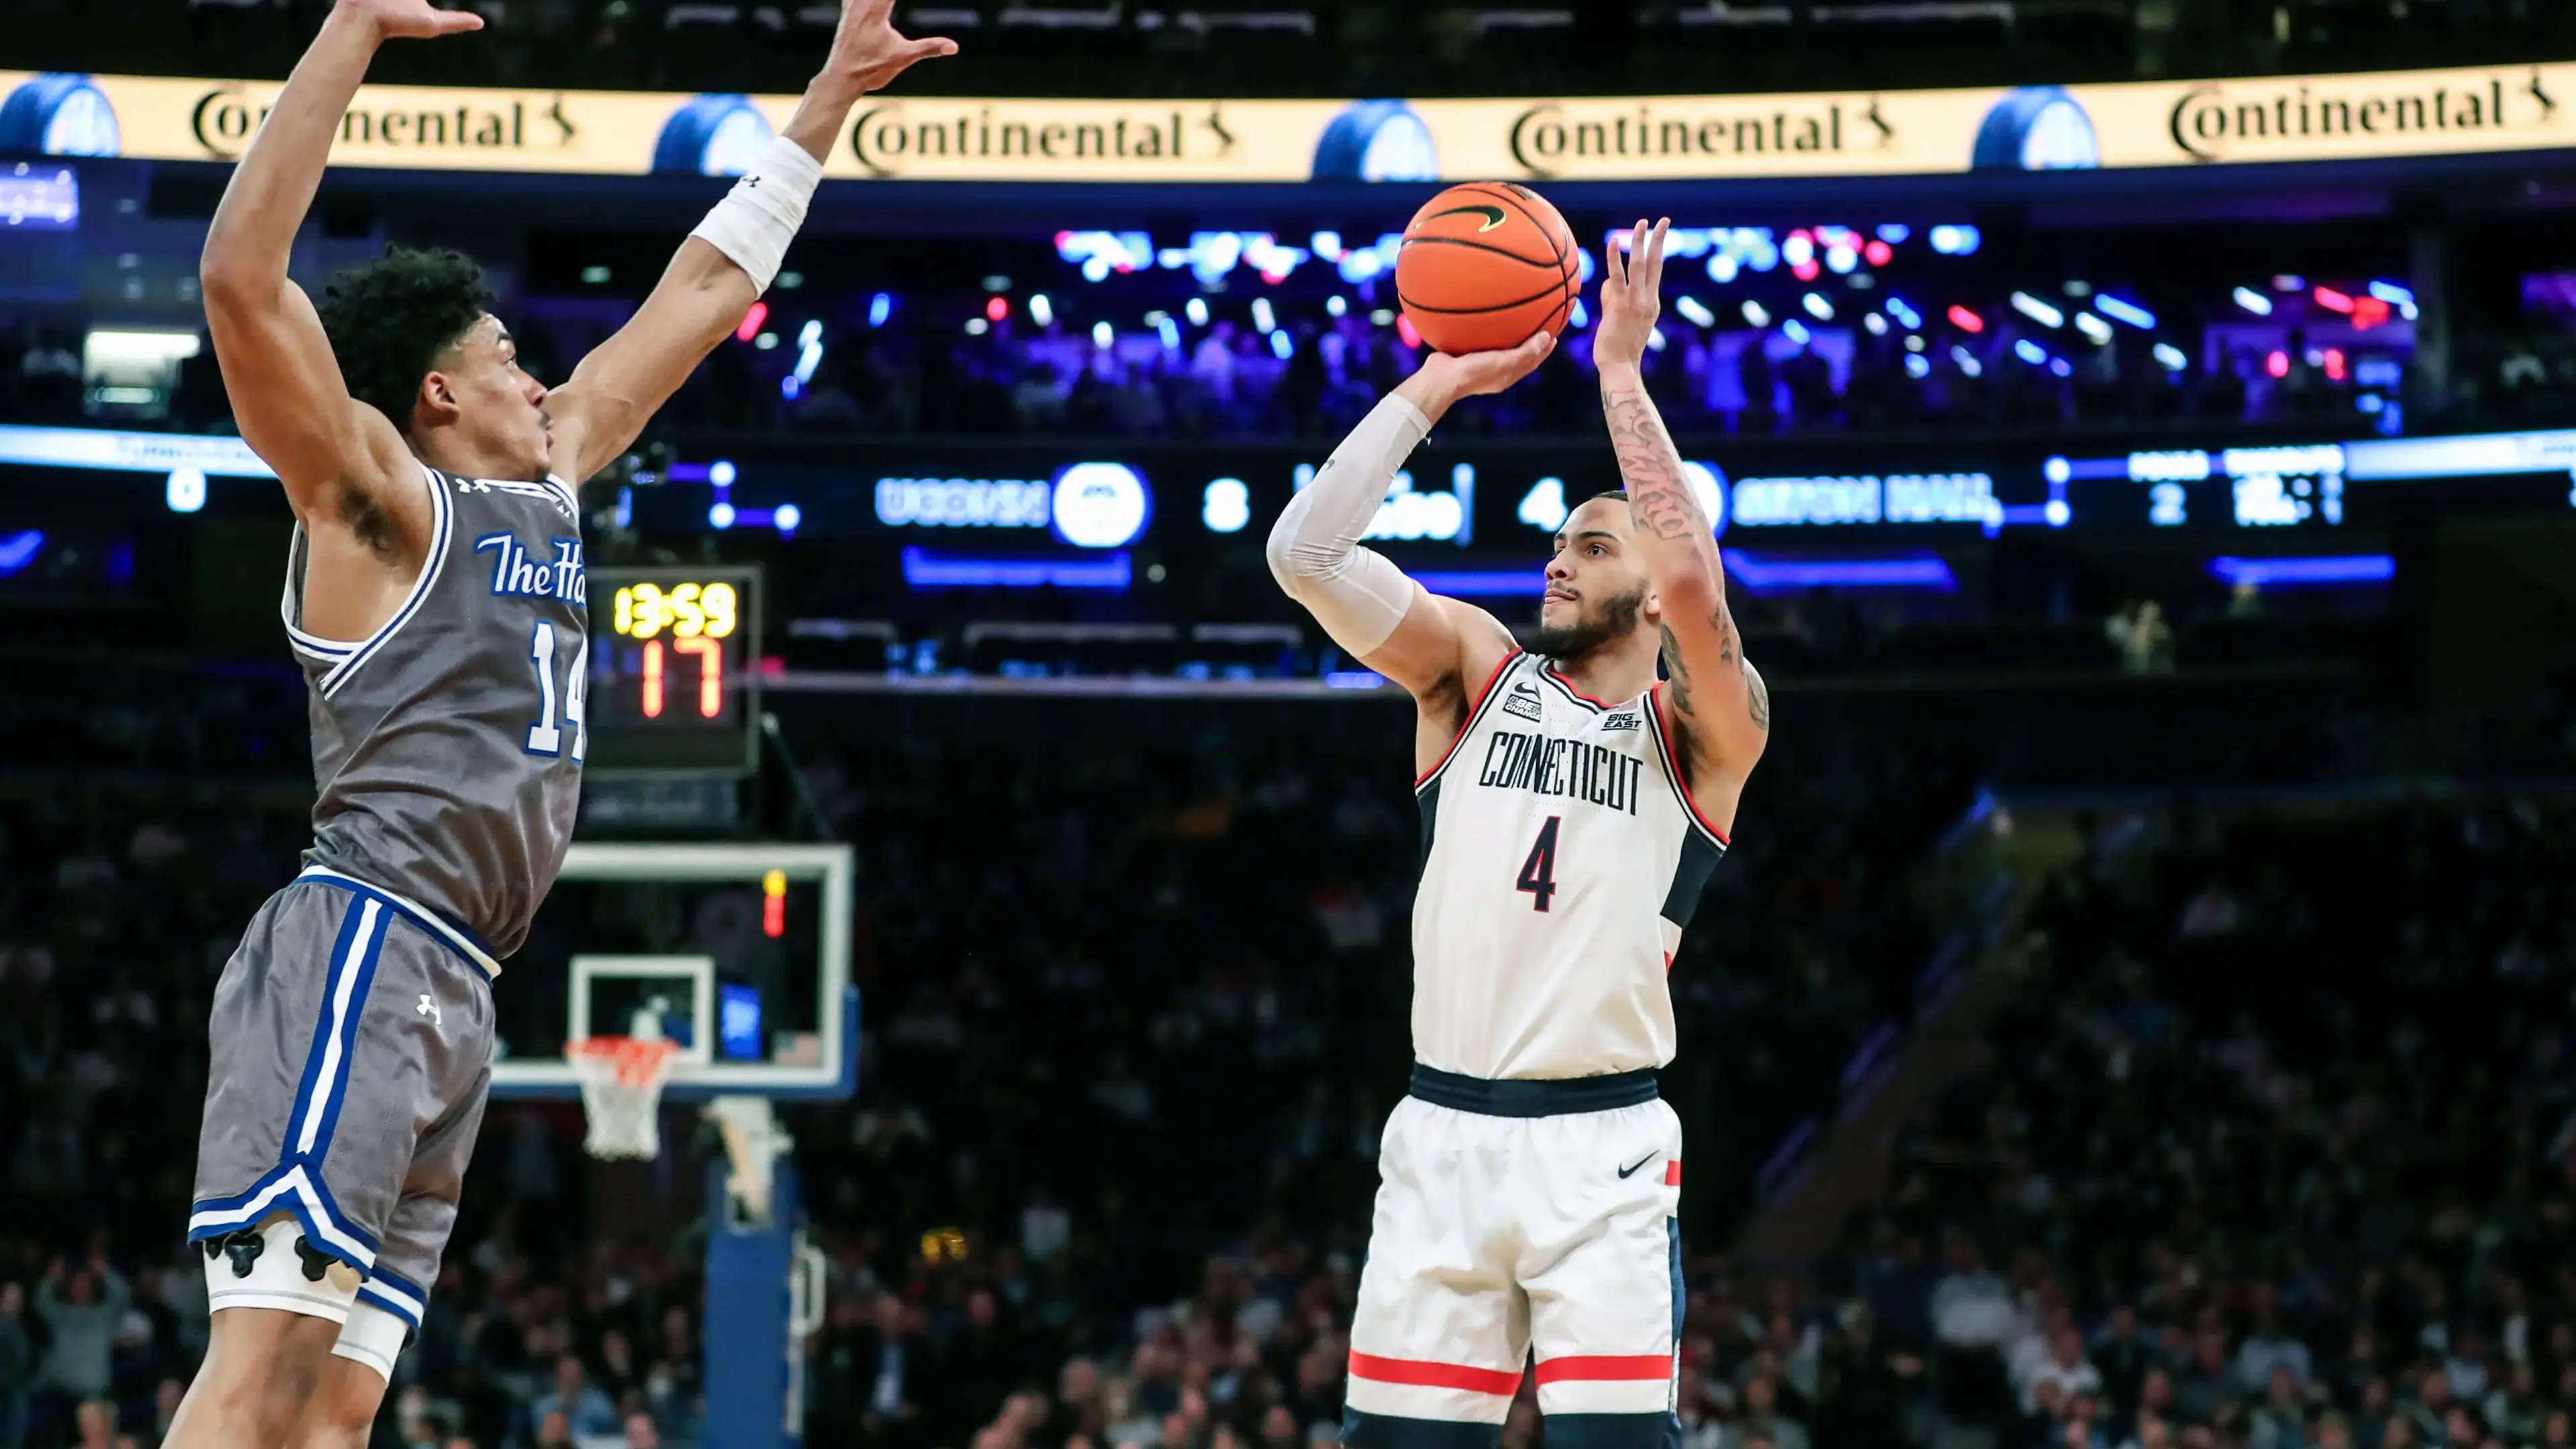 Mar 10, 2022; New York, NY, USA; Connecticut Huskies guard Tyrese Martin (4) shoots past Seton Hall Pirates guard Jared Rhoden (14) in the first half at the Big East Tournament at Madison Square Garden. / Wendell Cruz-USA TODAY Sports